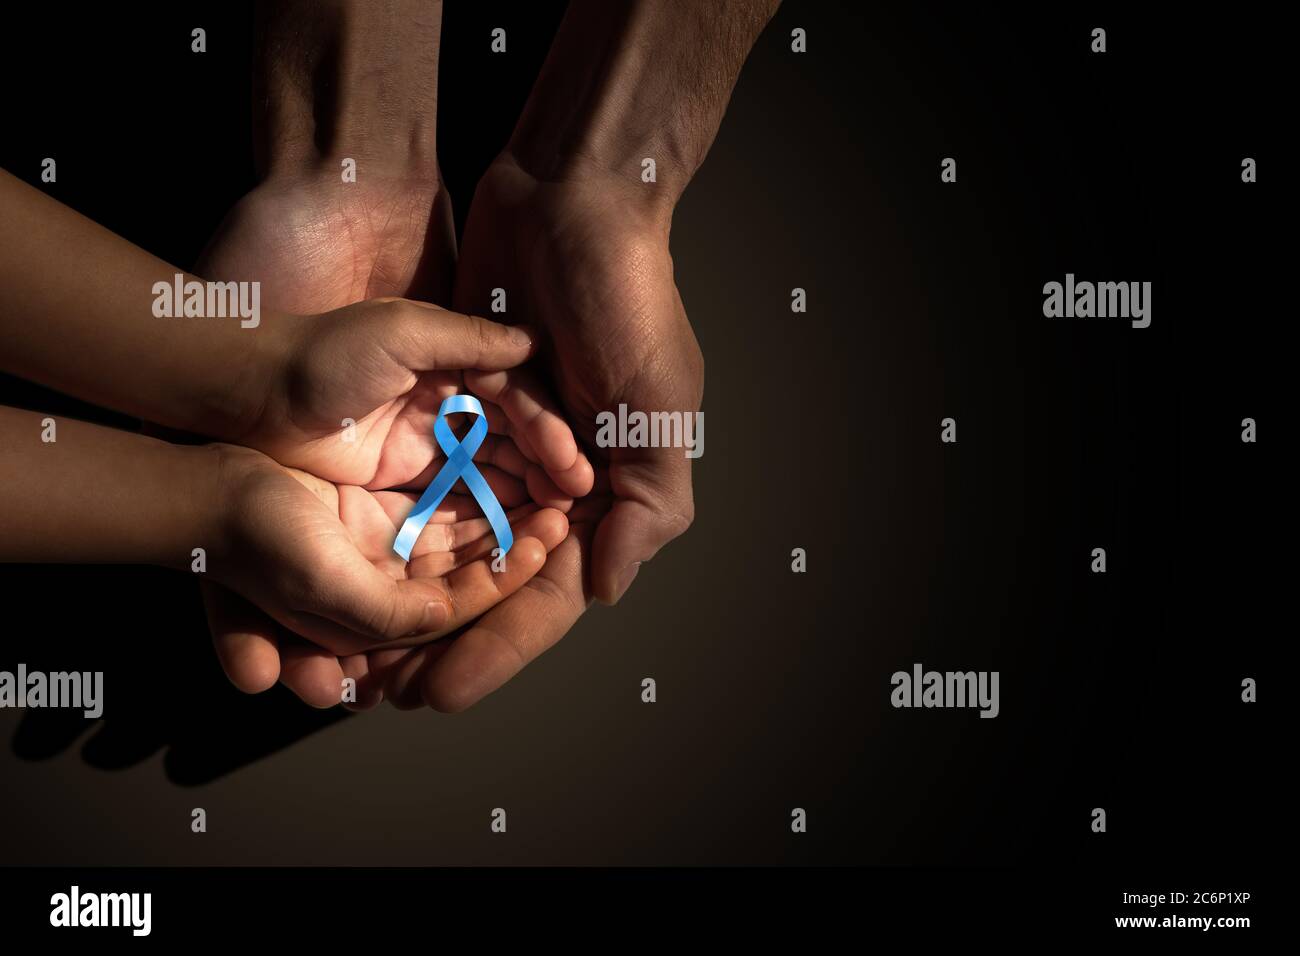 blue ribbon representing an annual event during the month of November to raise awareness of men's health issues and prostate cancer with copy space Stock Photo